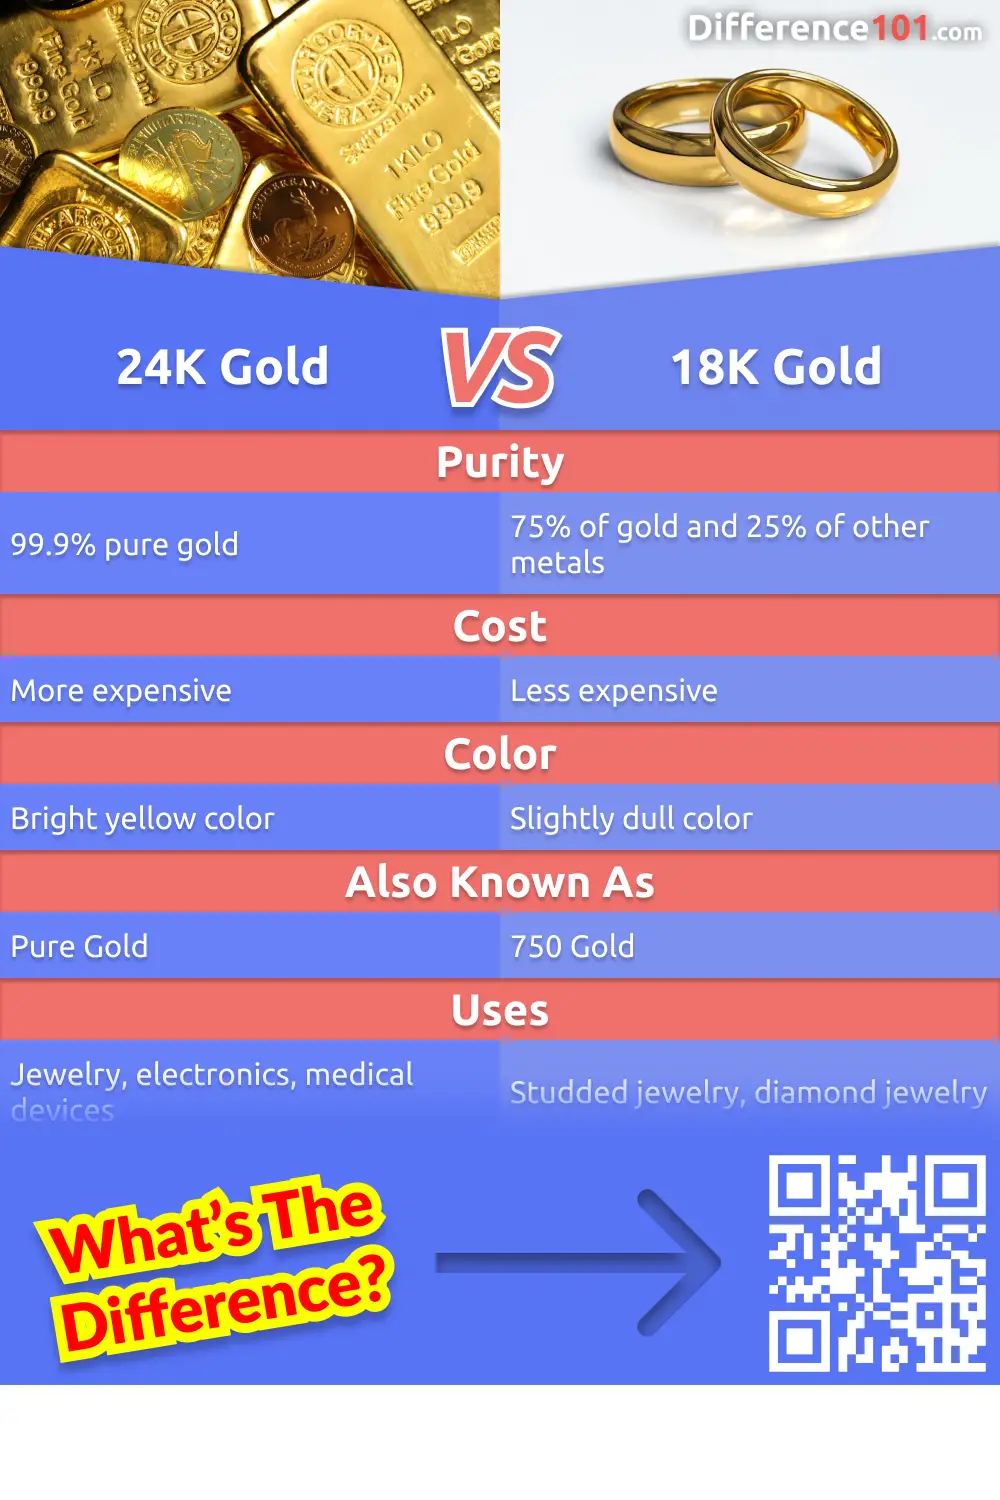 24K gold is the purest form of gold, but it is also the most expensive and delicate. 18K gold is a more affordable option. Learn more about the differences between 24K and 18K gold, and find out which one is right for you.